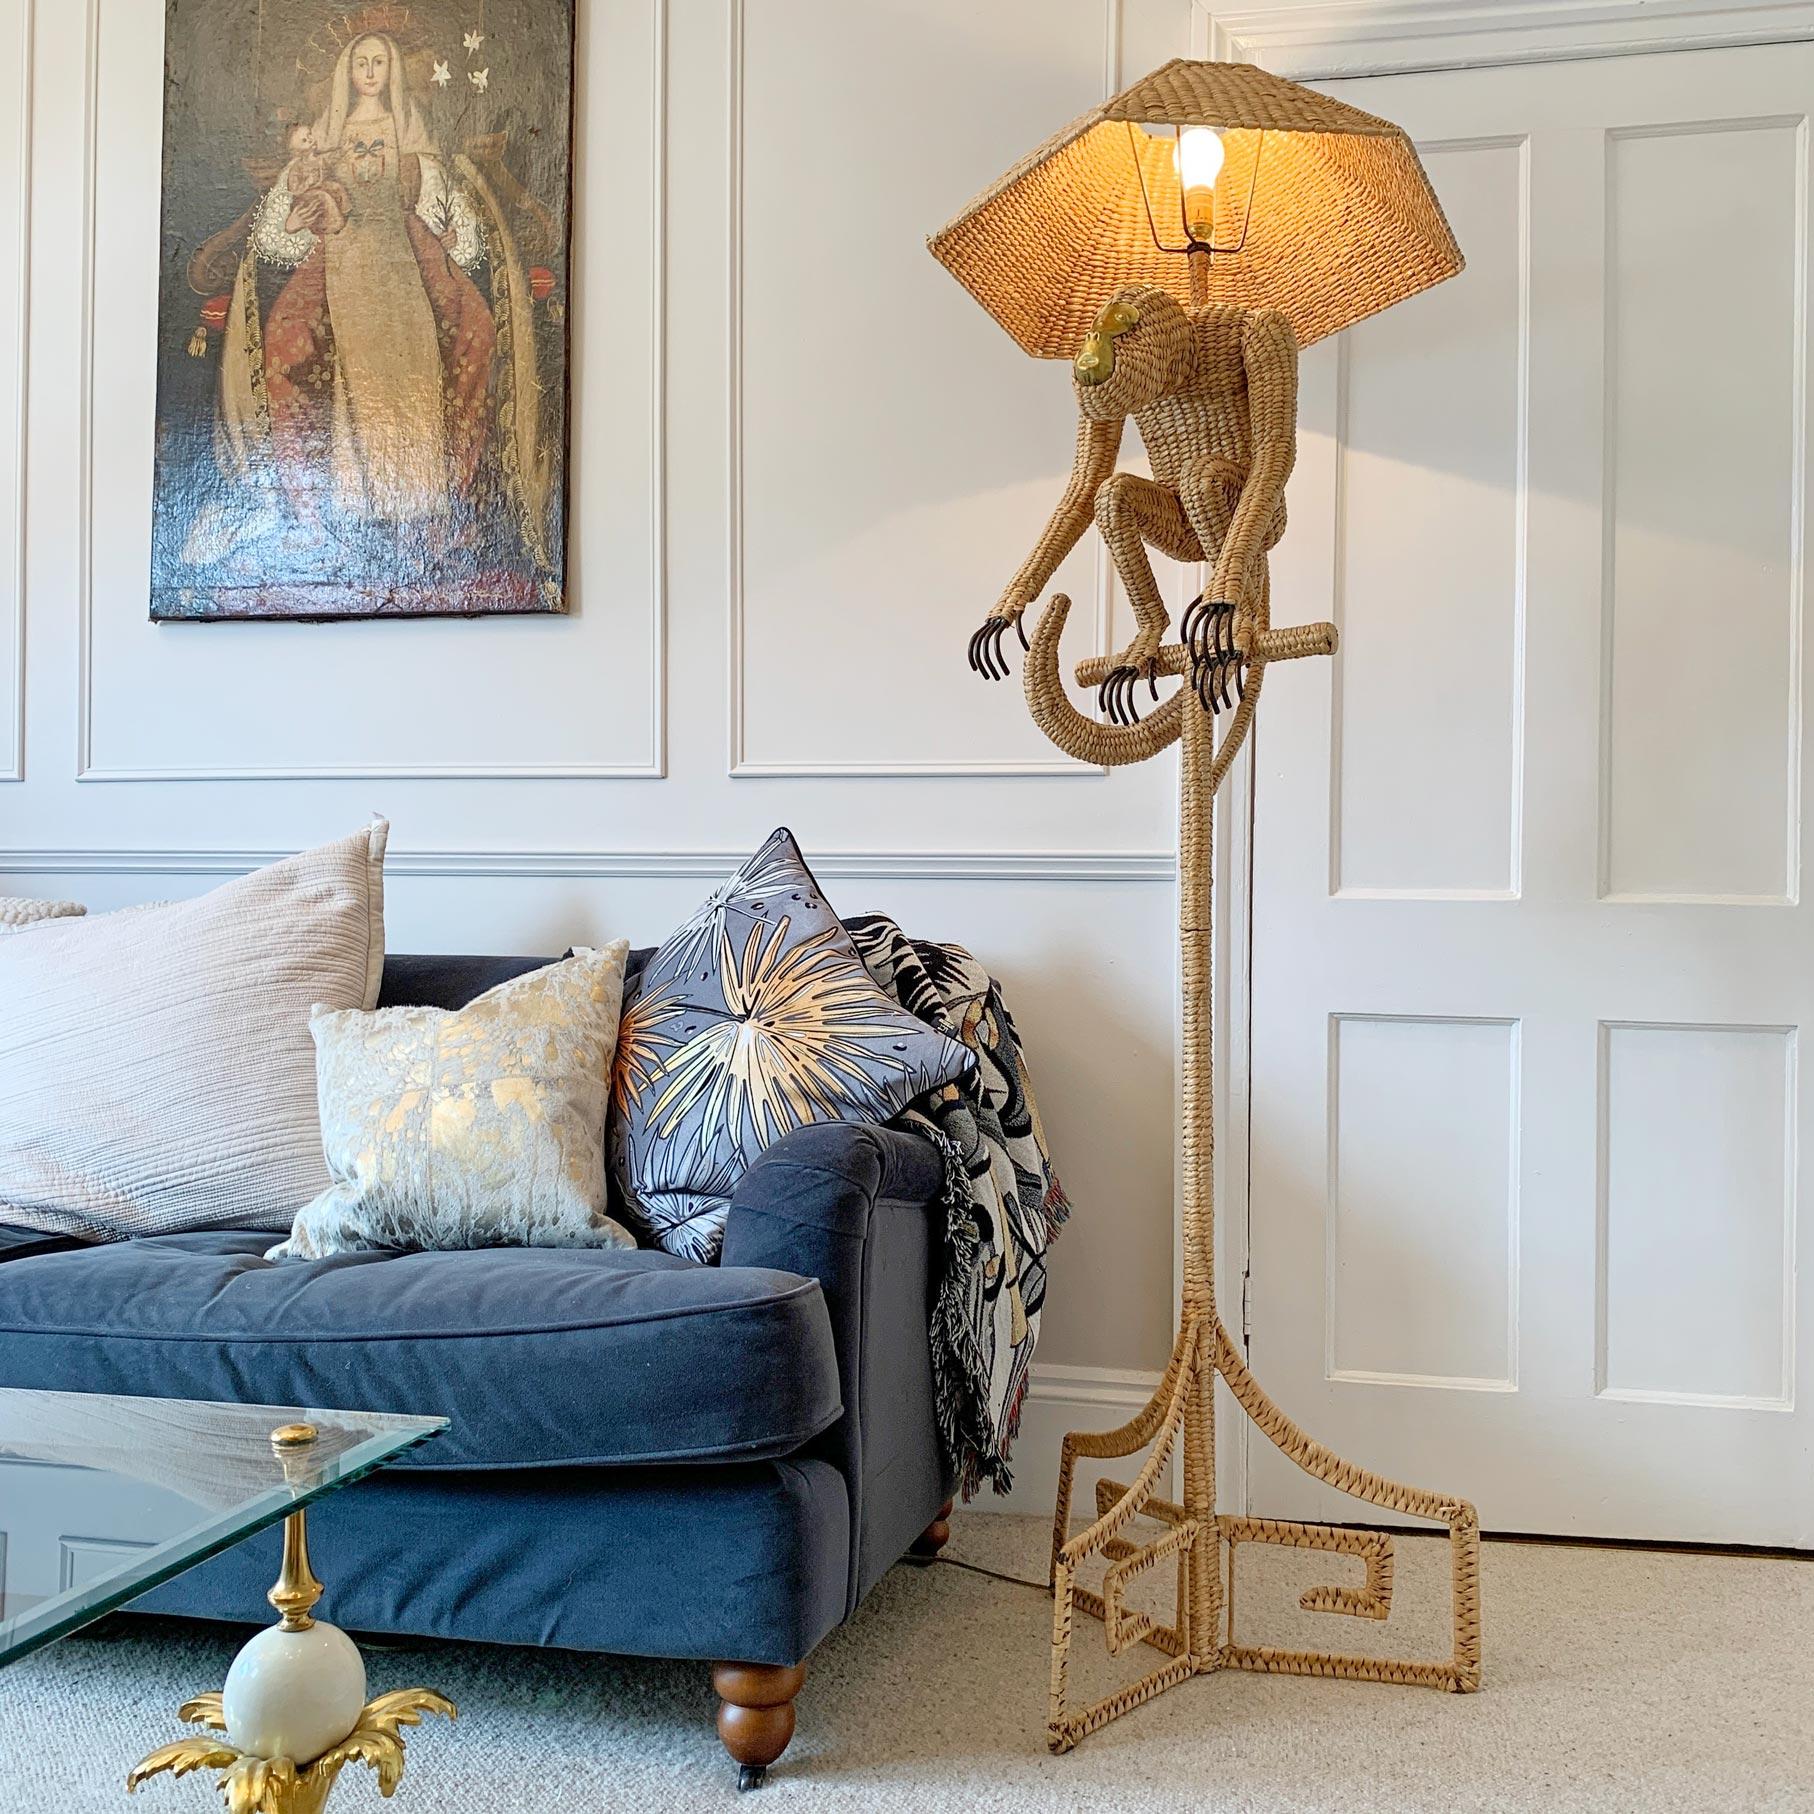 A quite exceptional floor lamp by the highly acclaimed Mexican artist and sculptor Mario Lopez Torres, the enormous metal frame and chuspata woven design stands at over 1.8 Metres tall and features the large perched monkey, with the trademark brass